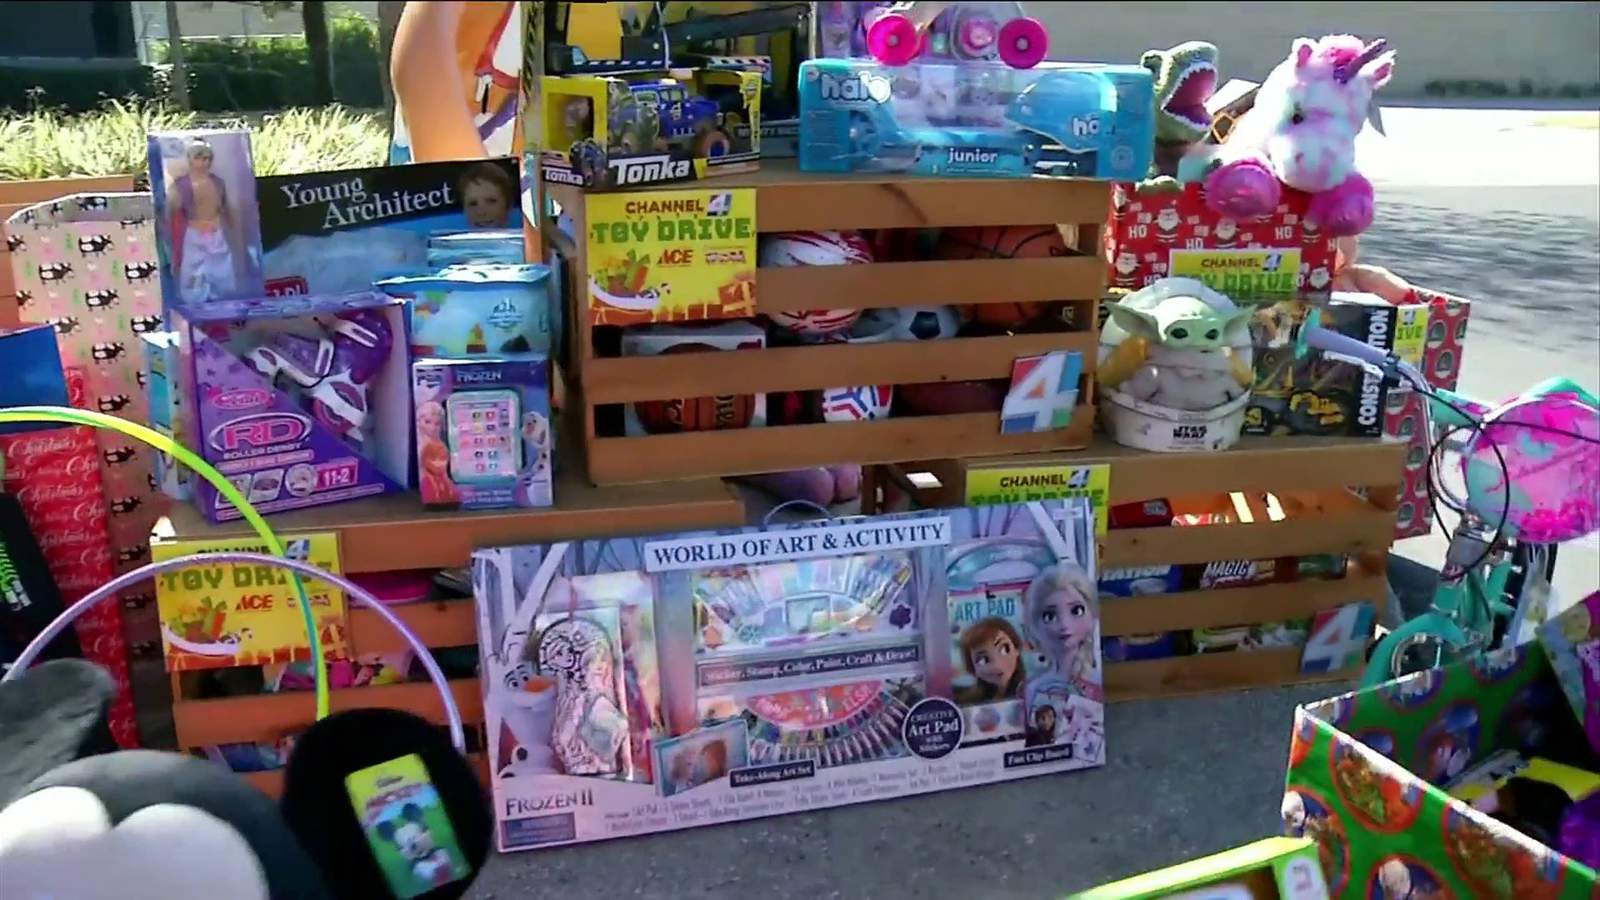 News4Jax viewers spread holiday cheer by donating toys to kids in need